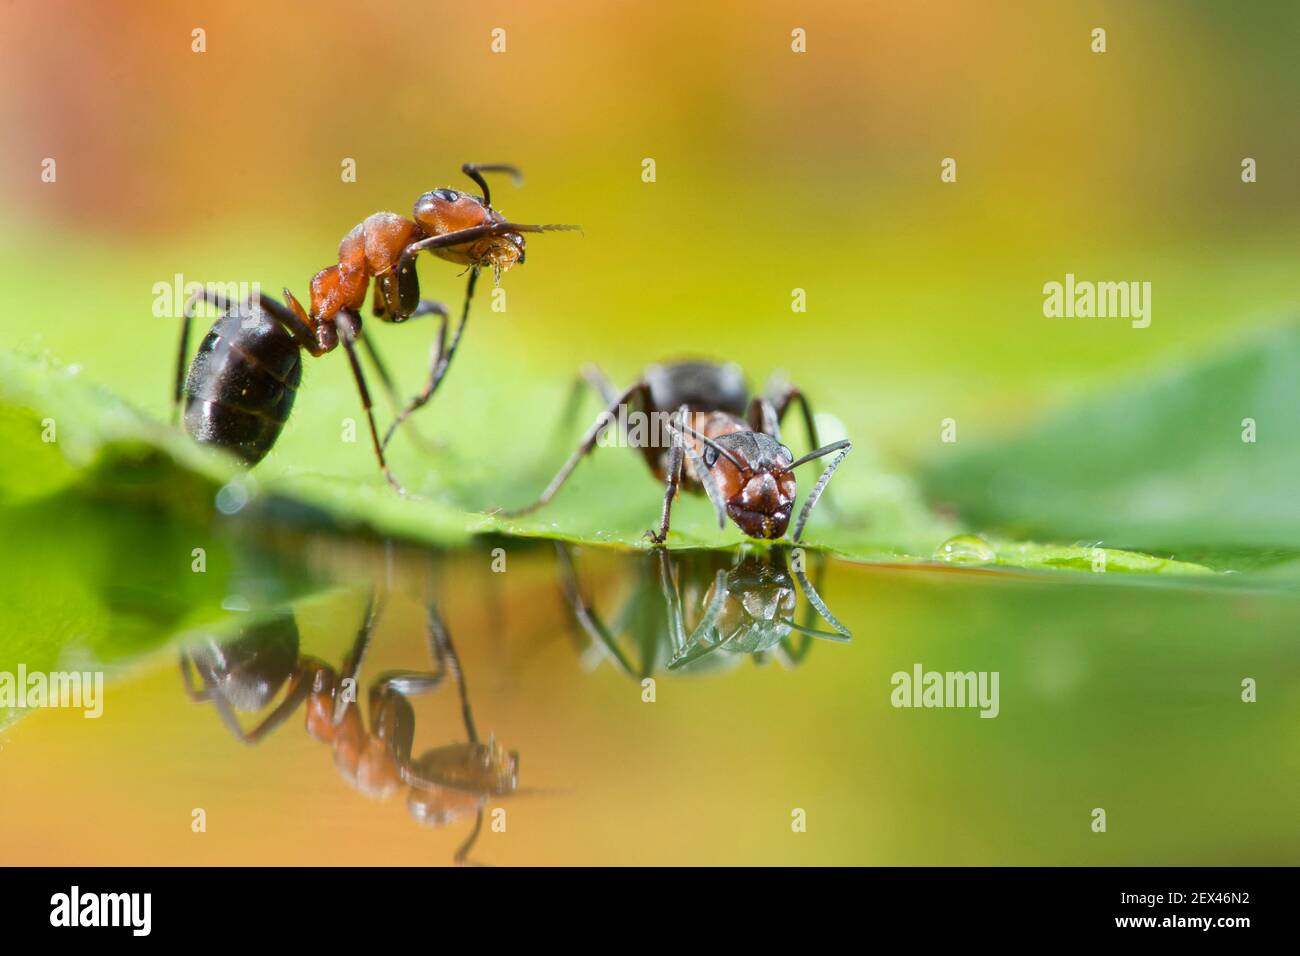 European Red Wood Ant (Formica polyctena) drinking and their reflection, Lorraine, France Stock Photo